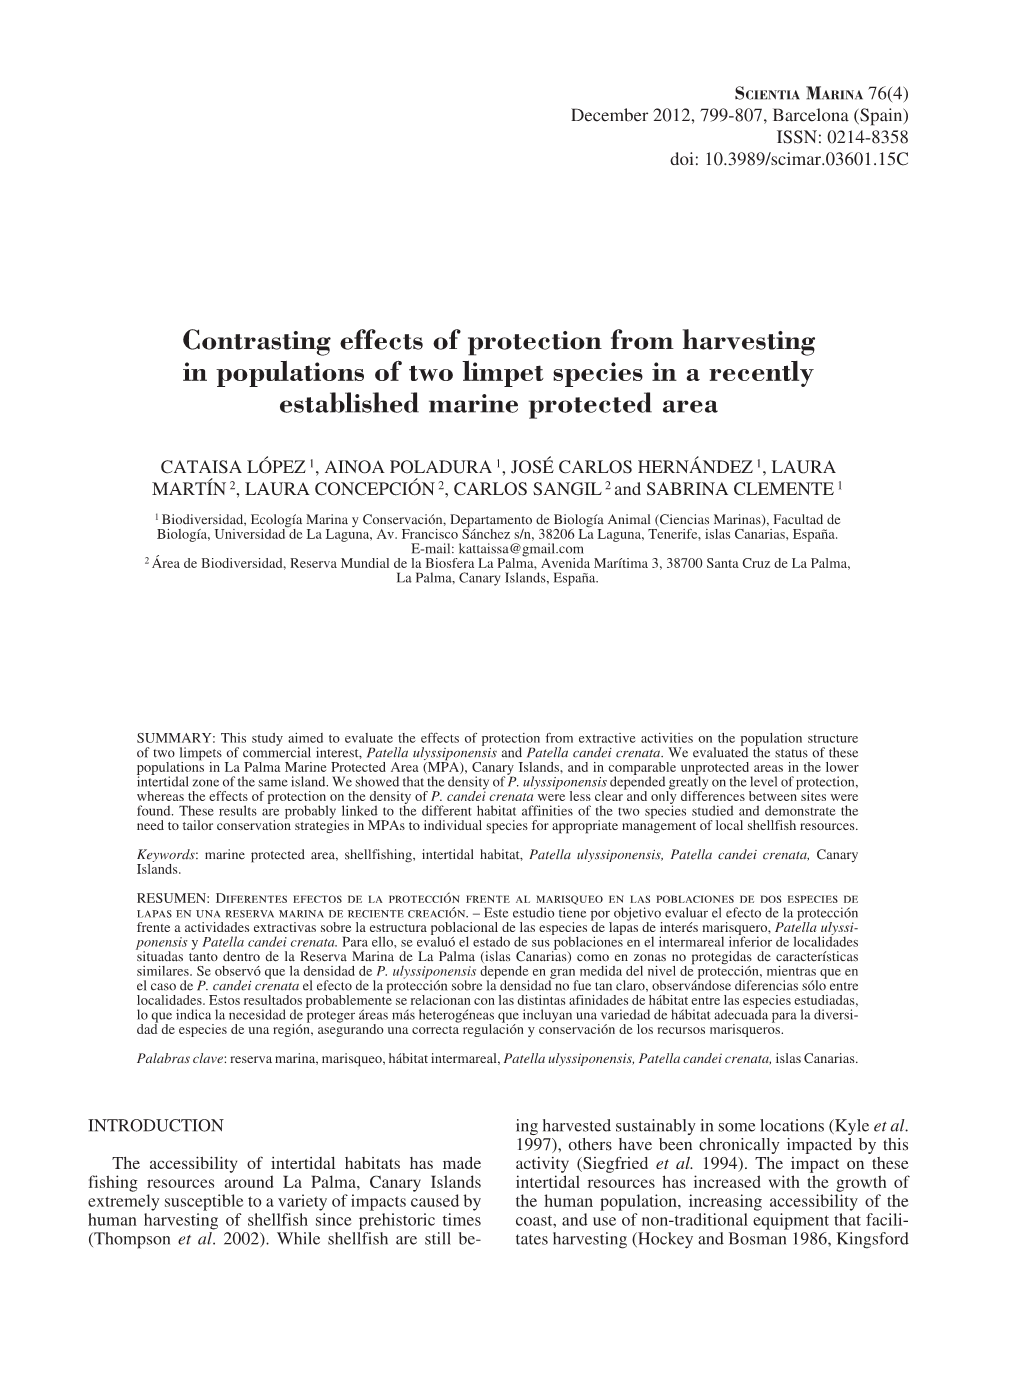 Contrasting Effects of Protection from Harvesting in Populations of Two Limpet Species in a Recently Established Marine Protected Area